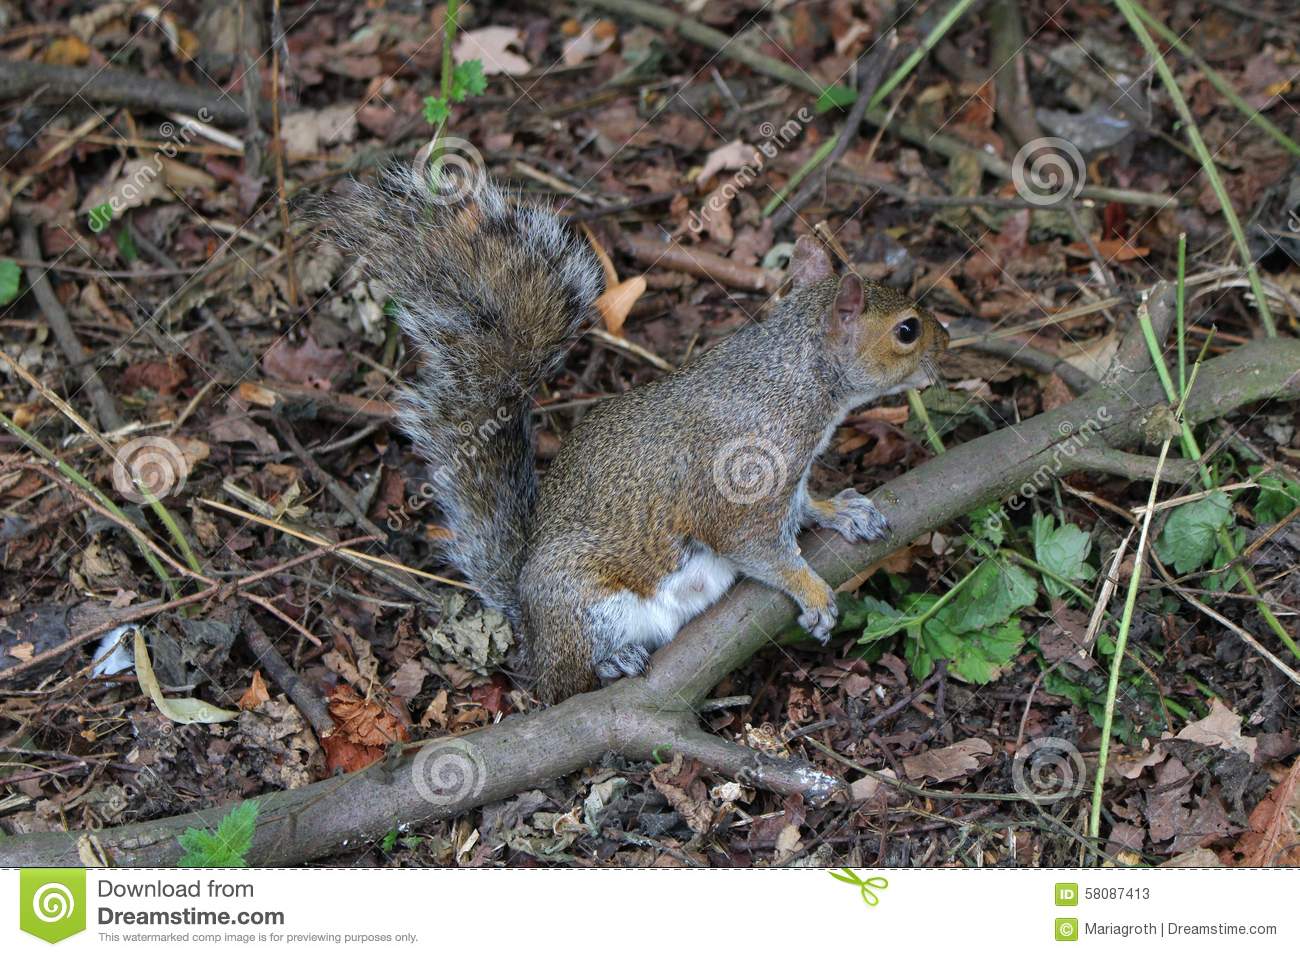 Arboreal Rodent clipart #20, Download drawings